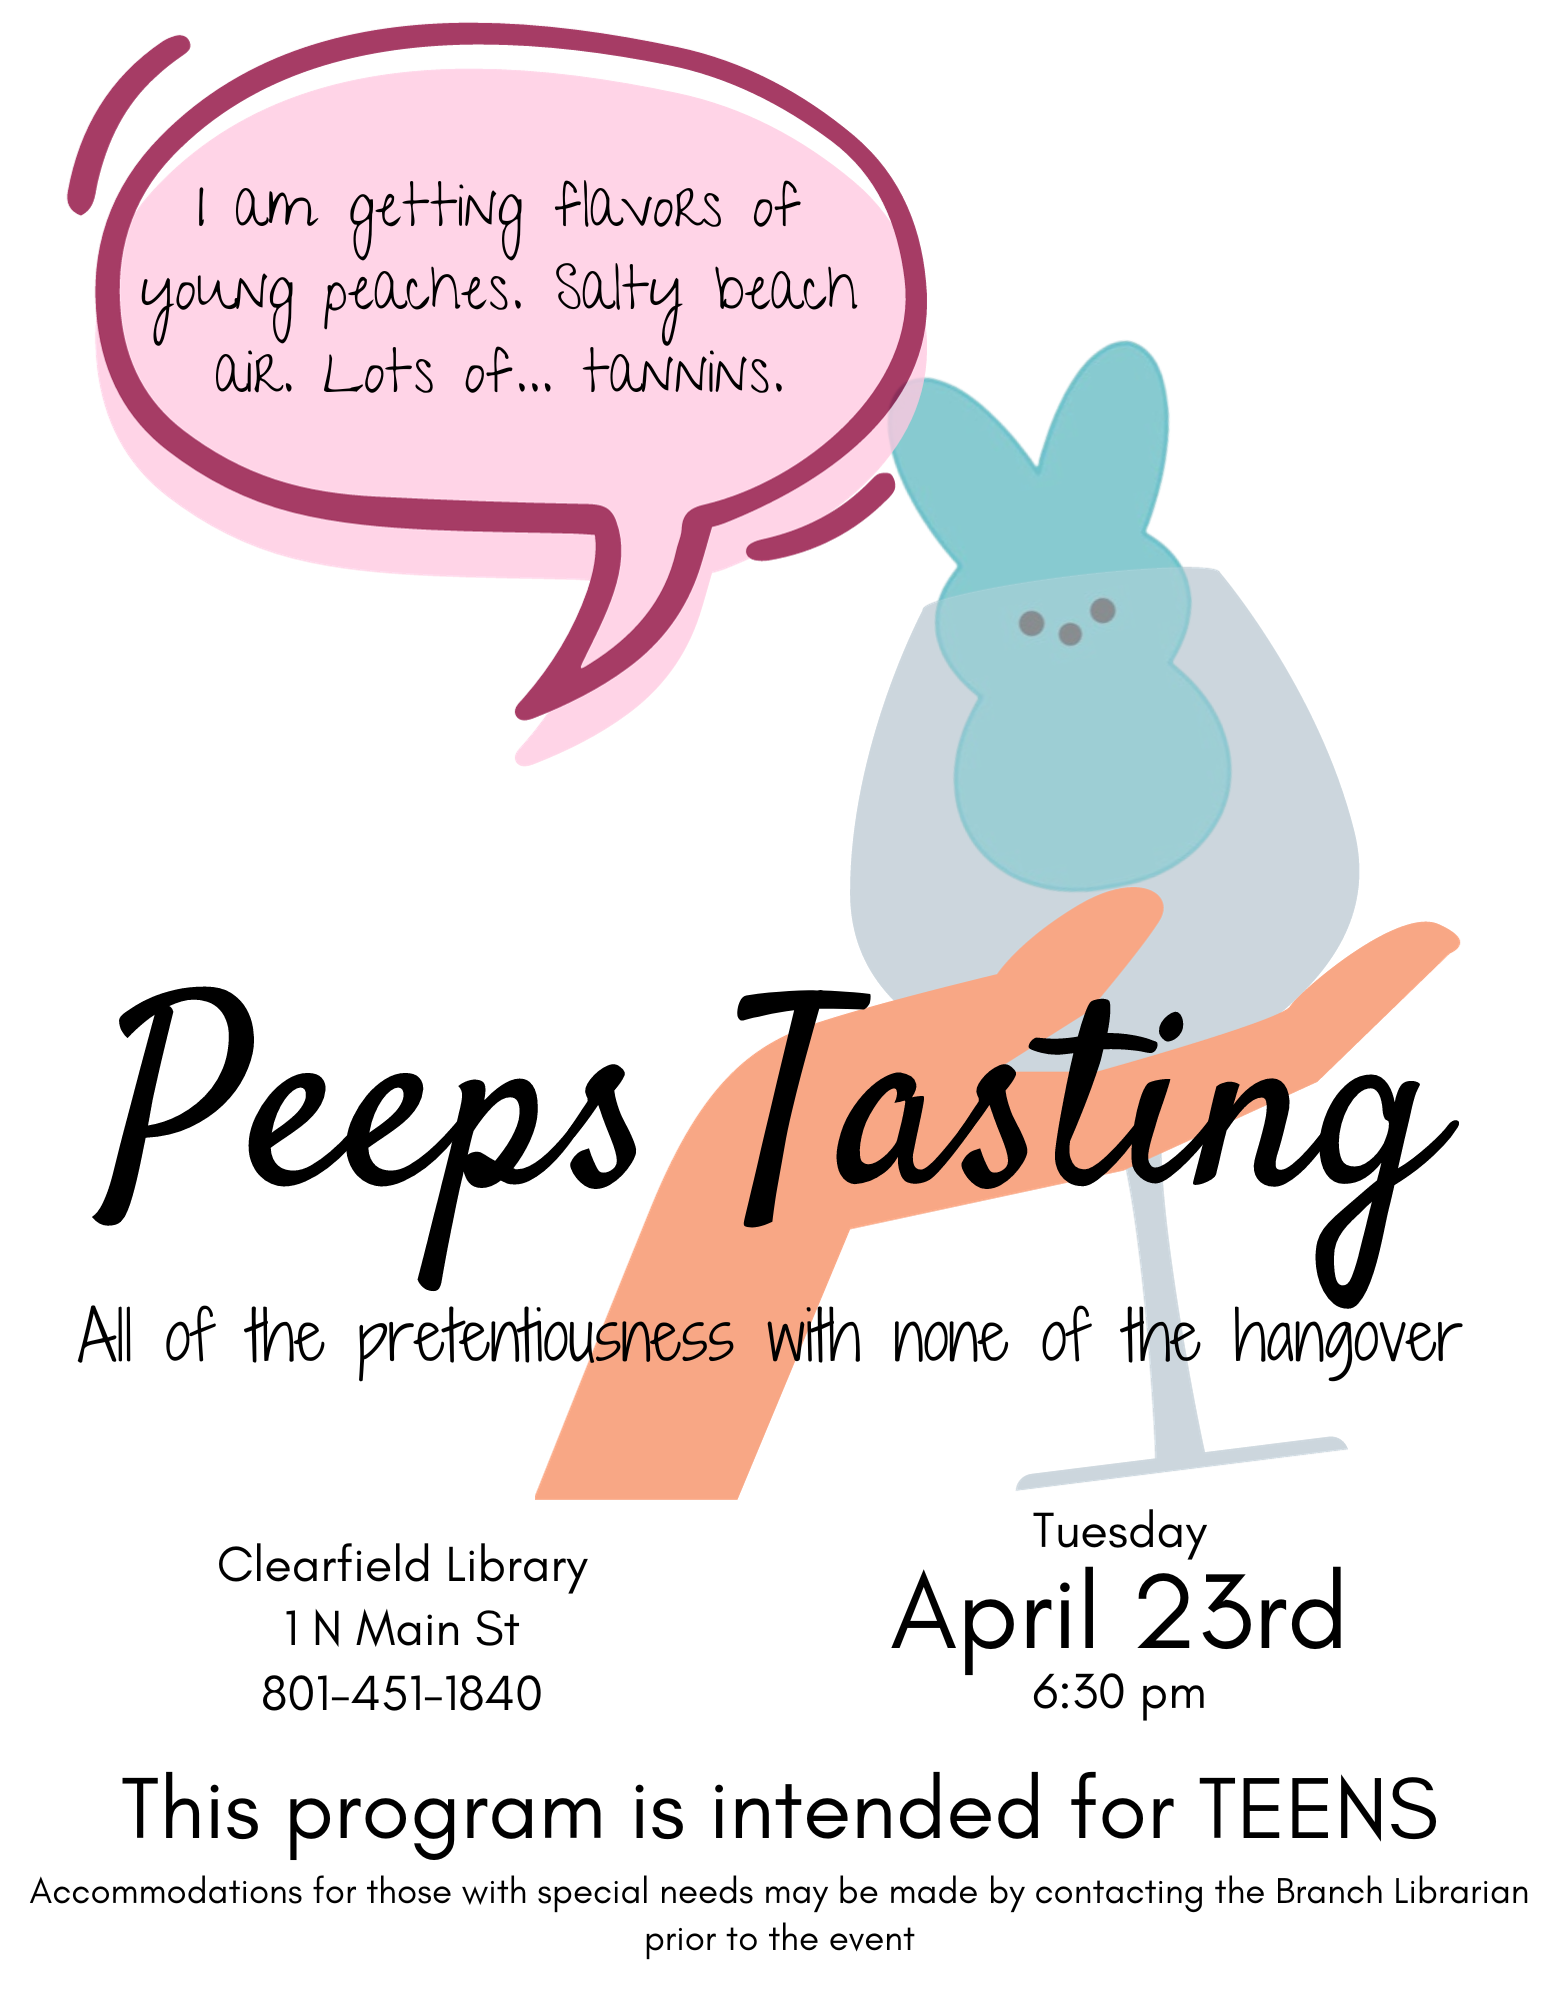 Image of a hand holding a wine glass in which rests a blue bunny-shaped peeps marshmallow. In a word bubble, text reads: "I am getting flavors of young peaches. Salty beach air. Lots of... tannins." Remaining text on page reads: Peeps Tasting, all of the pretentiousness, none of the hangover. Clearfield Library 1 N Main St 801-451-1840. Tuesday April 23rd 6:30 pm. This program is intended for TEENS Accommodations for those with special needs may be made by contacting the Branch Librarian prior to the event